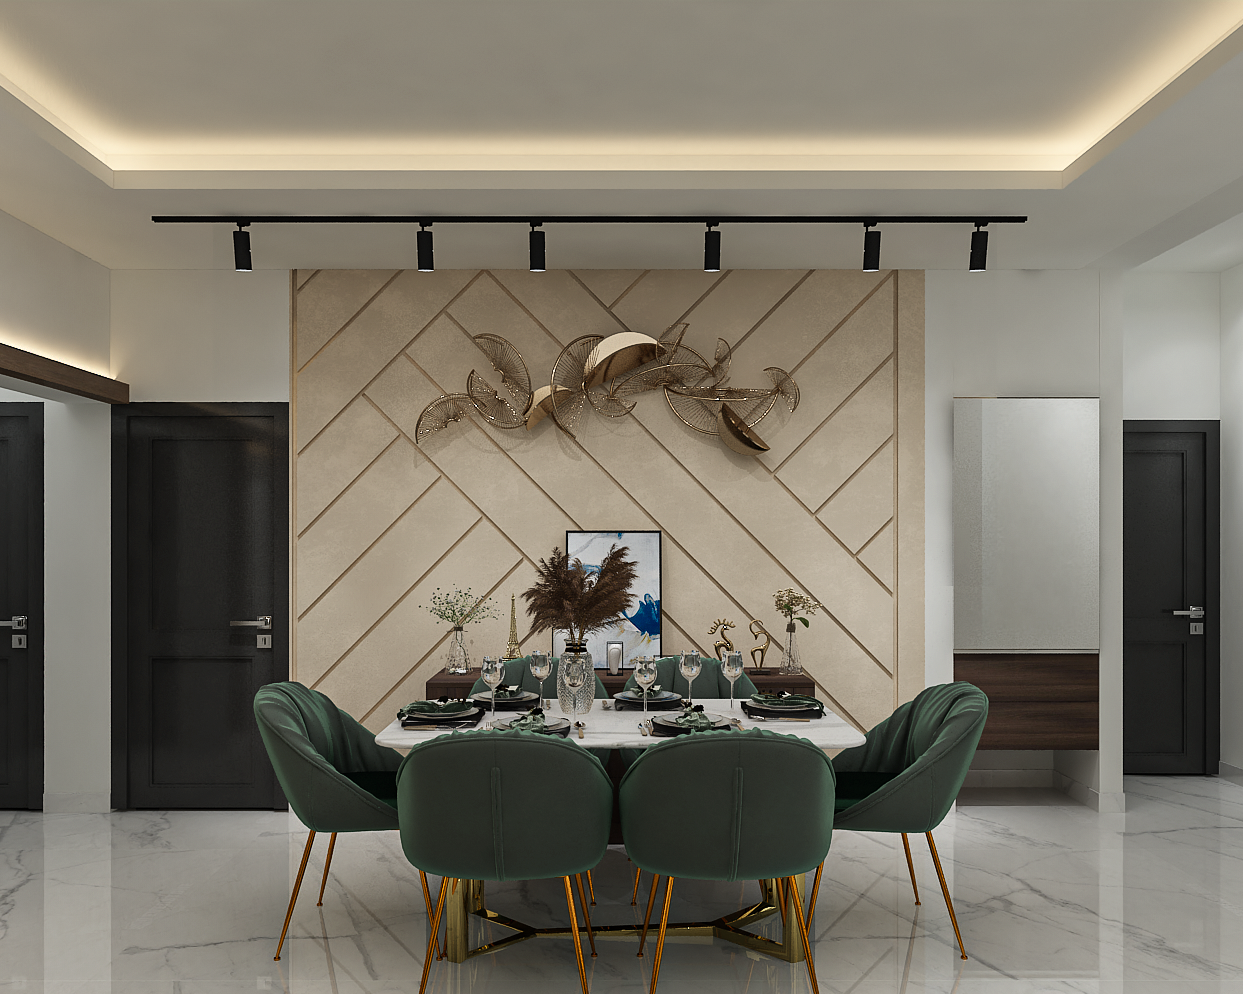 Modern 6-Seater Dining Room Design With Green Chairs